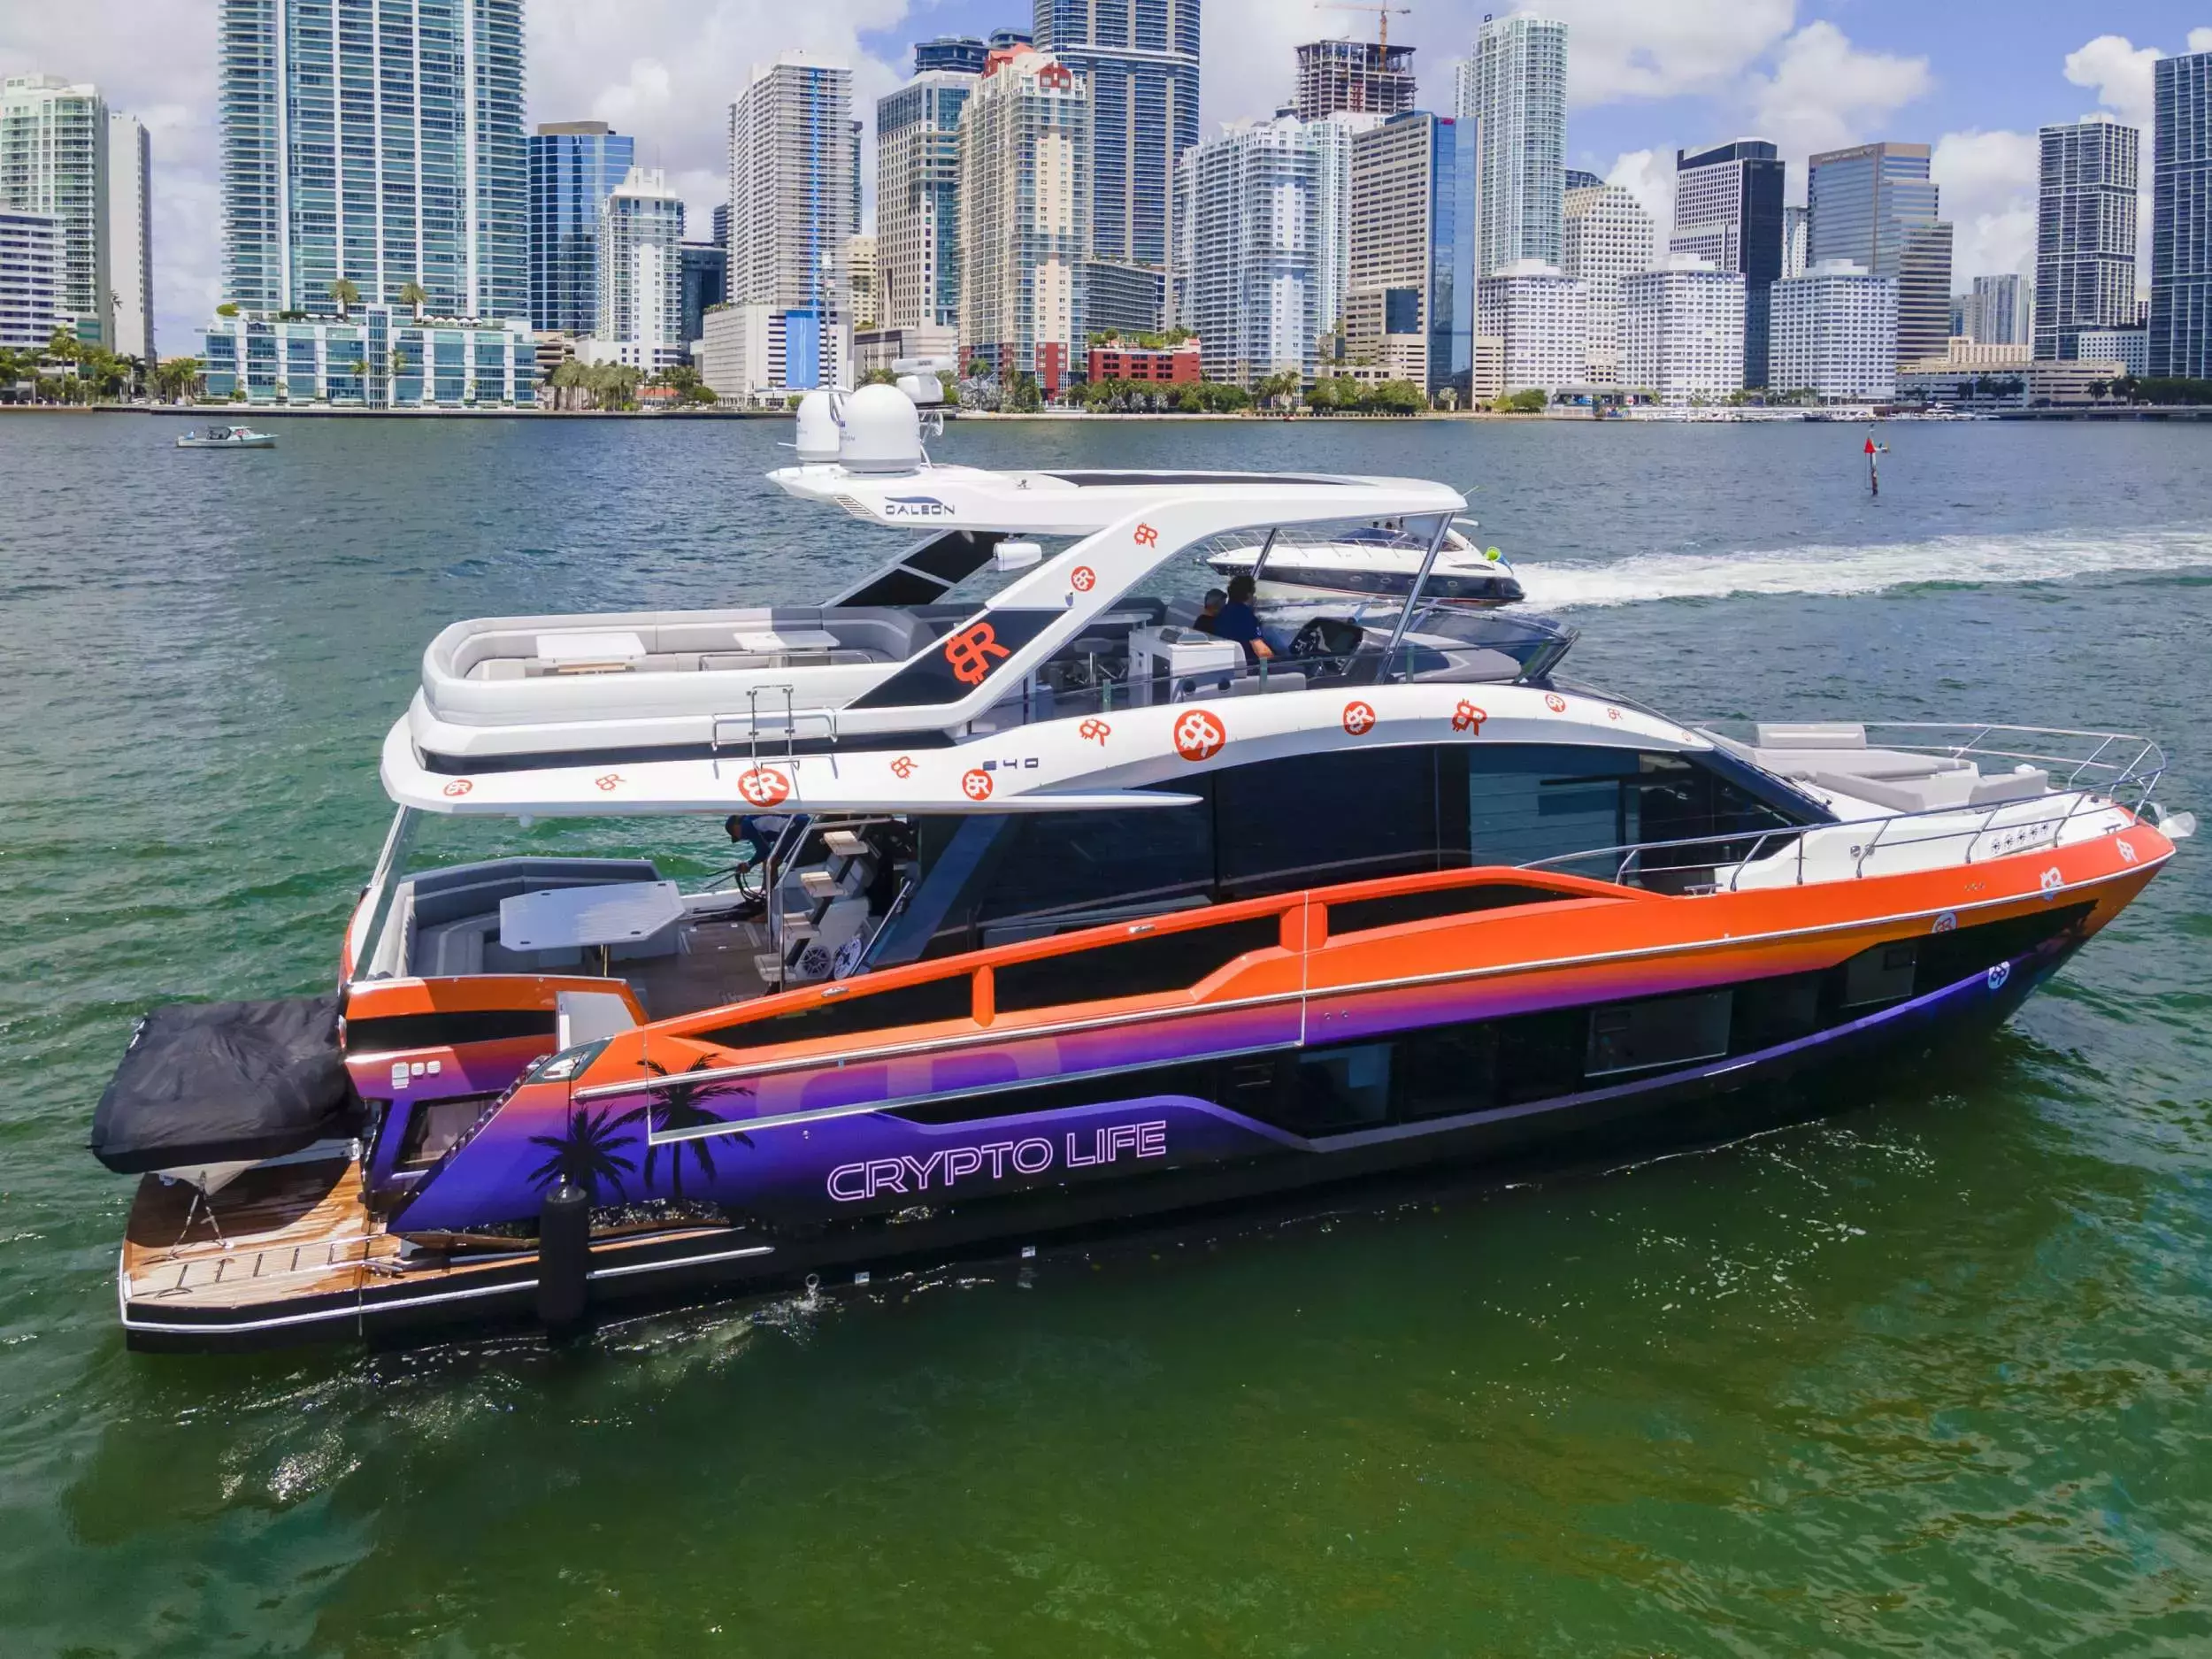 Crypto Life by Galeon - Special Offer for a private Motor Yacht Charter in Miami with a crew